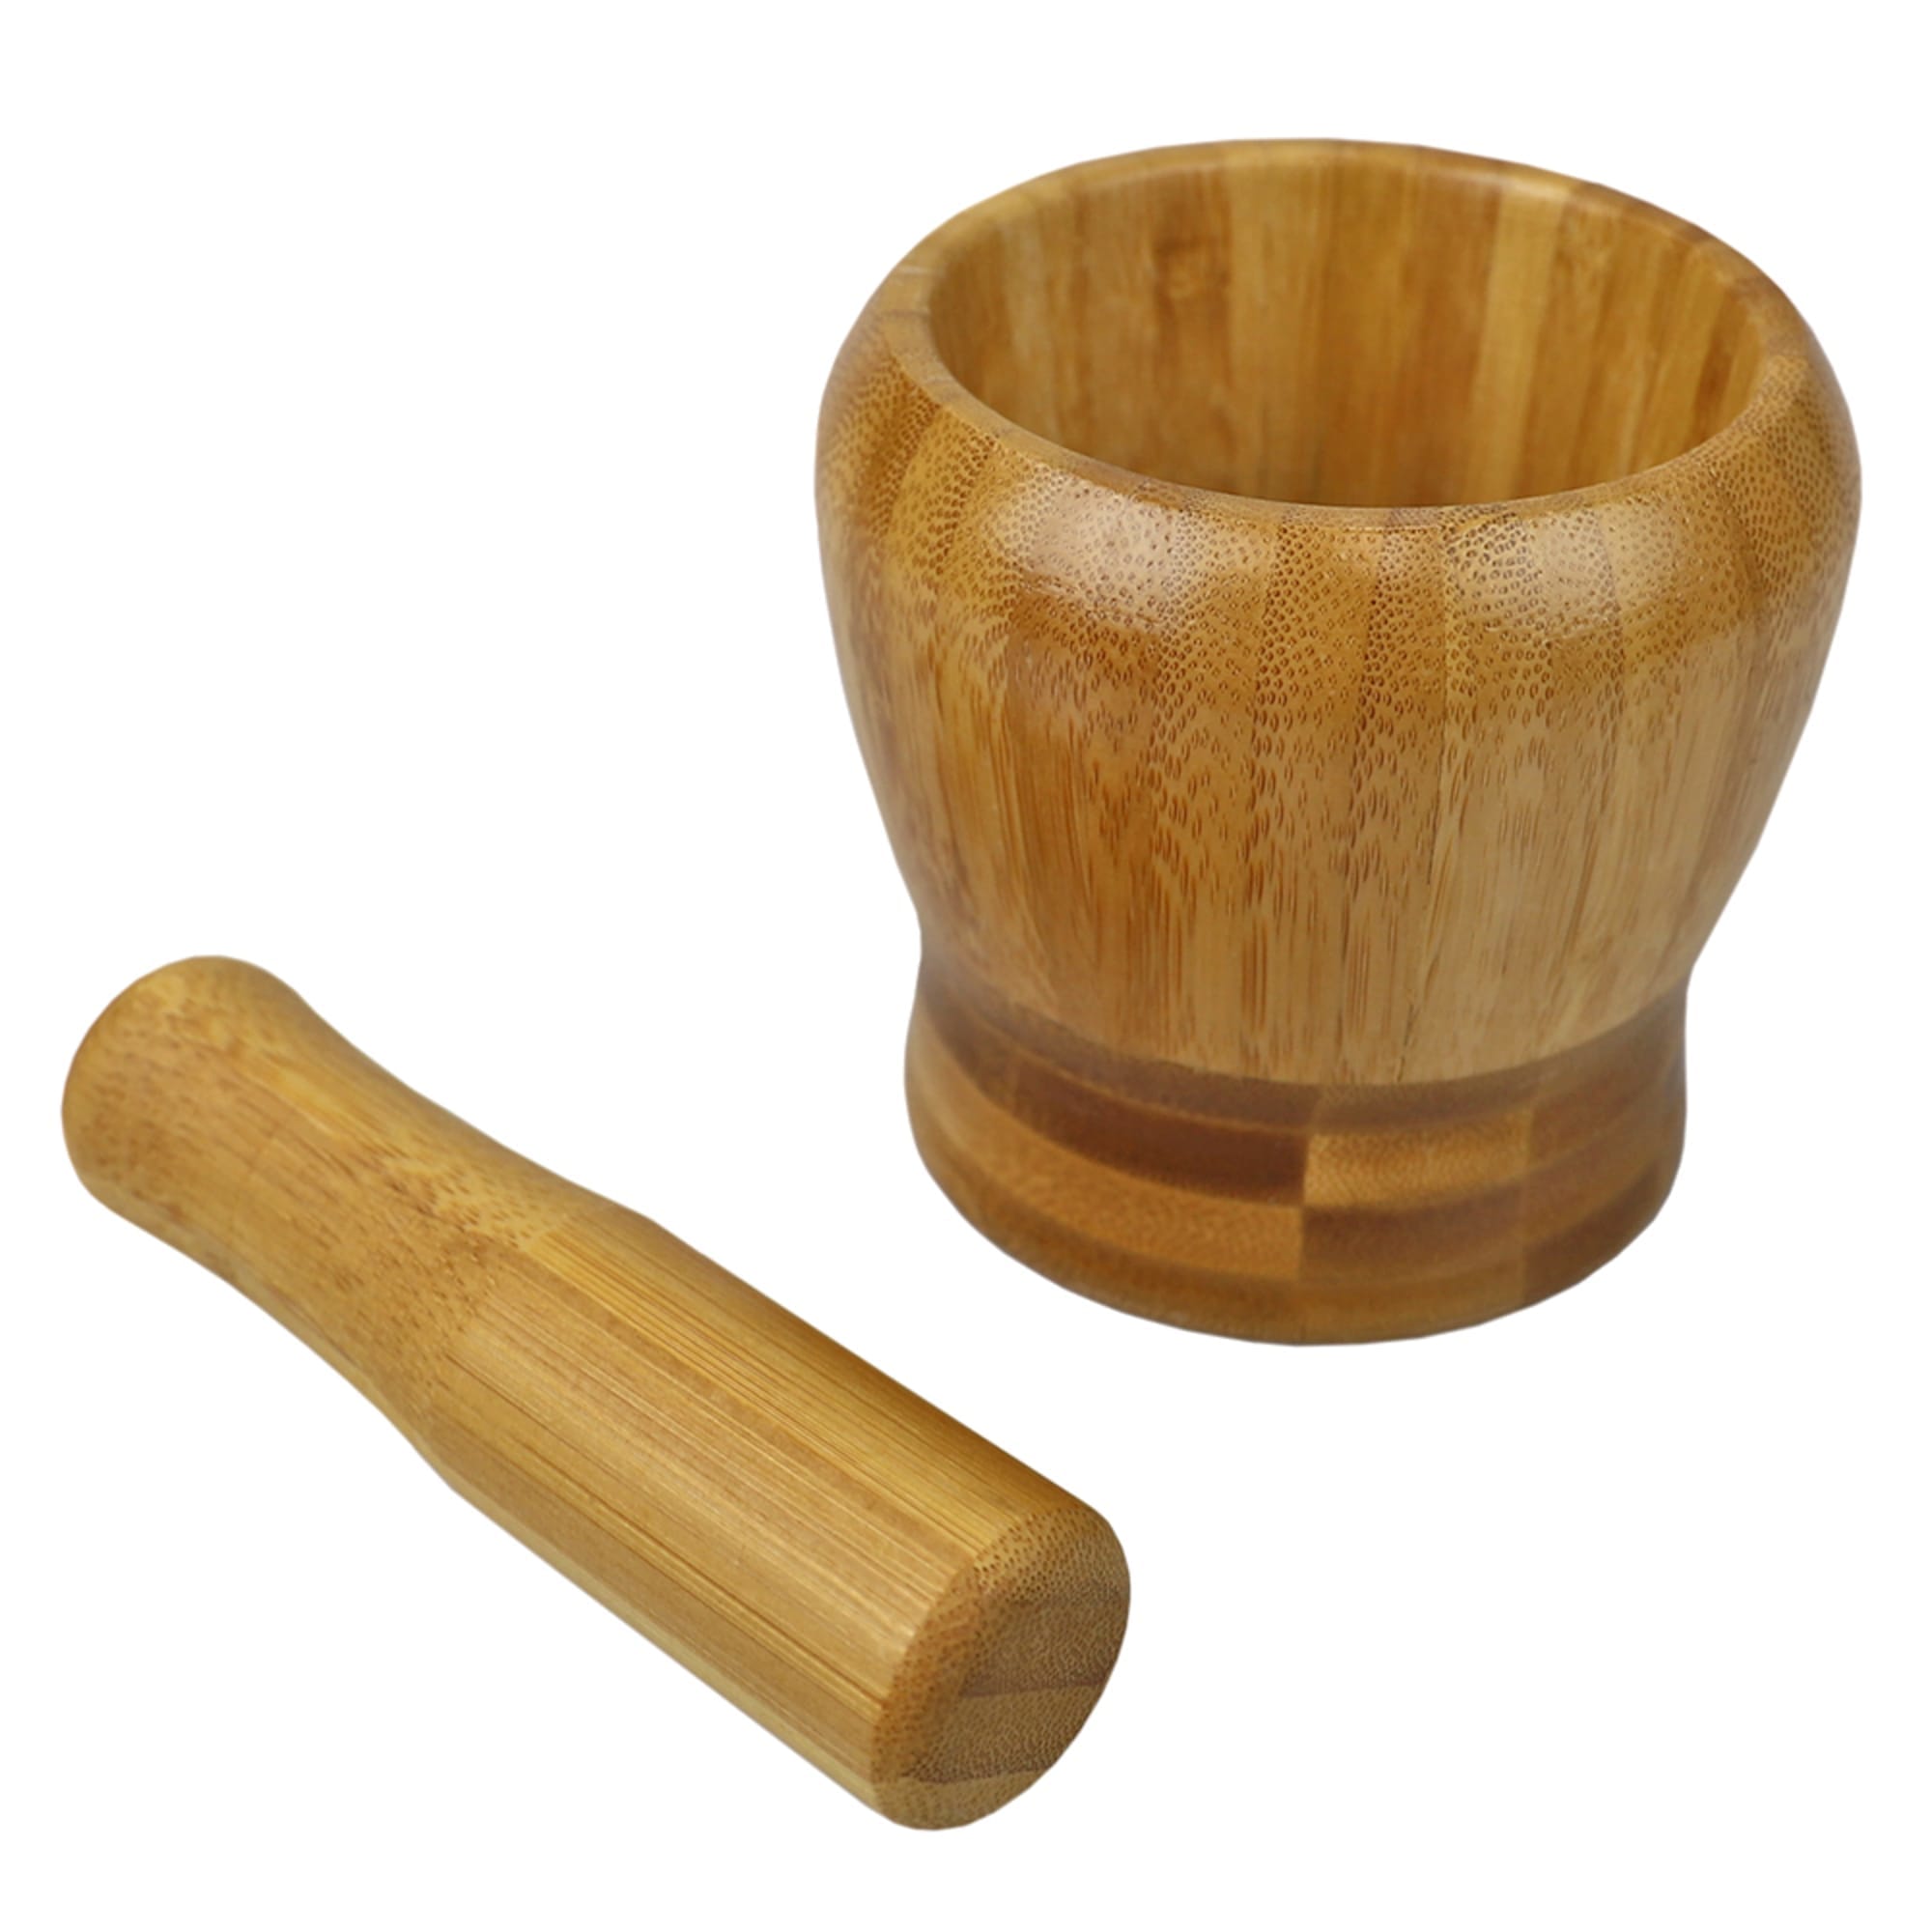 Home Basics Non-Skid Rustic  No-Spill Large Bamboo Mortar and Pestle, Natural $6.50 EACH, CASE PACK OF 12